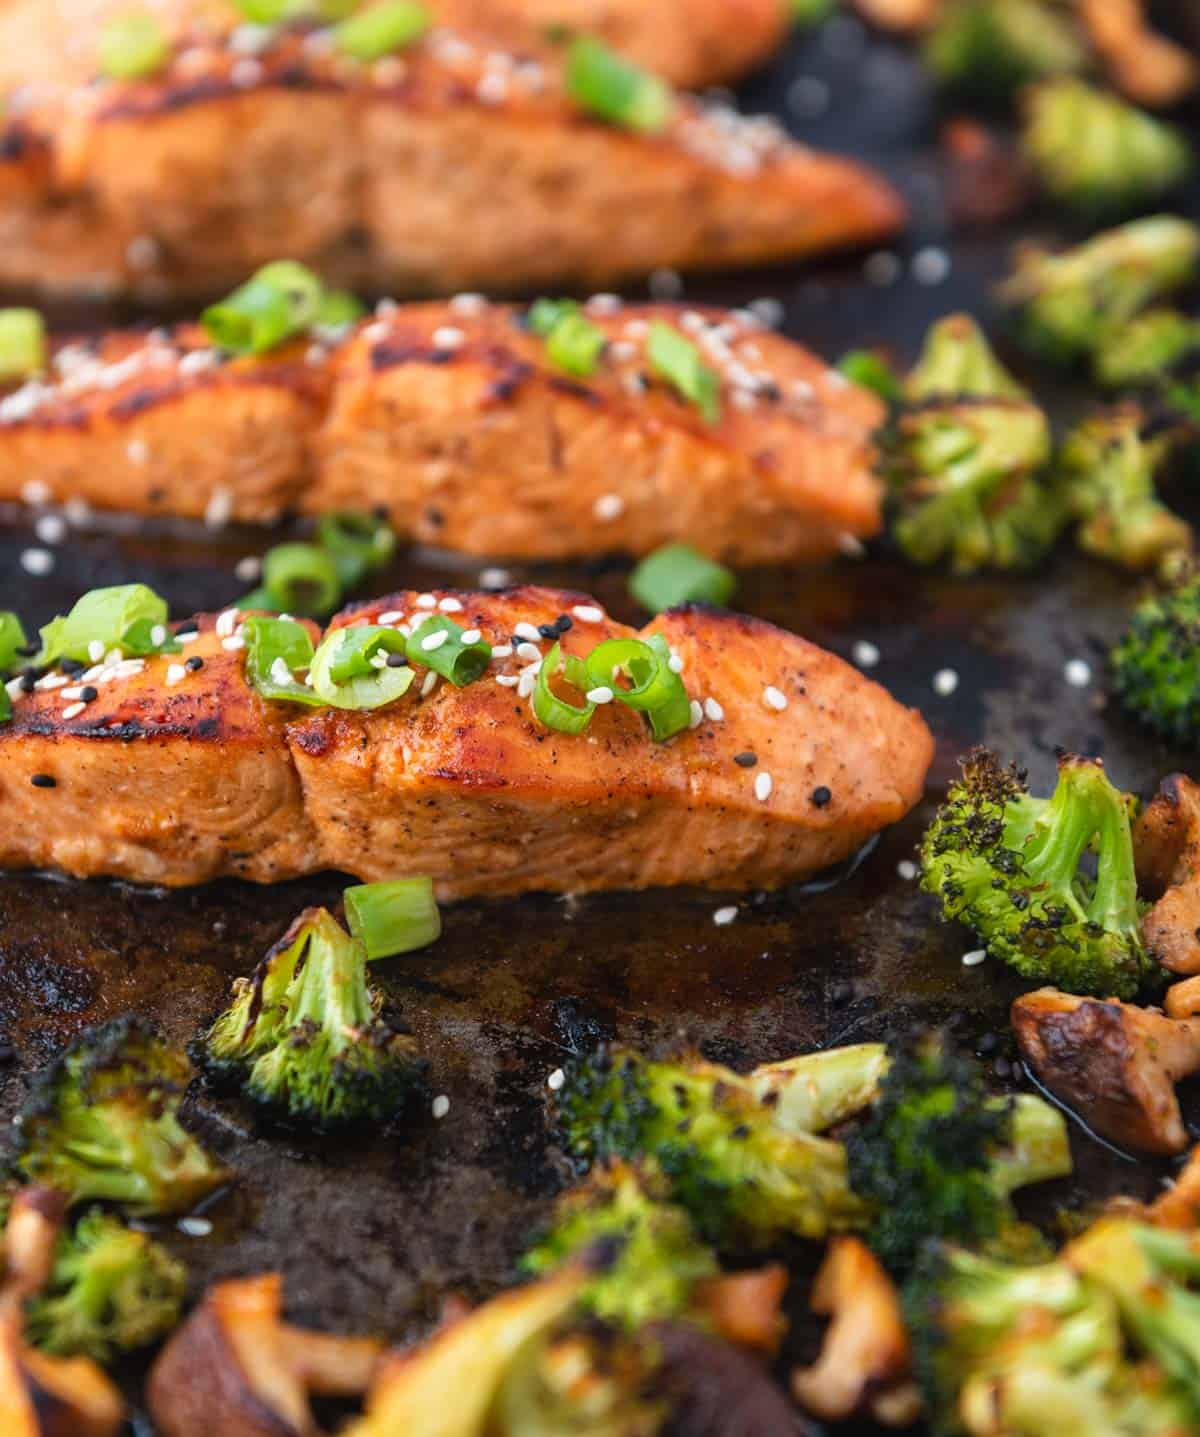 baked salmon filets with broccoli and mushrooms on a dark baking sheet